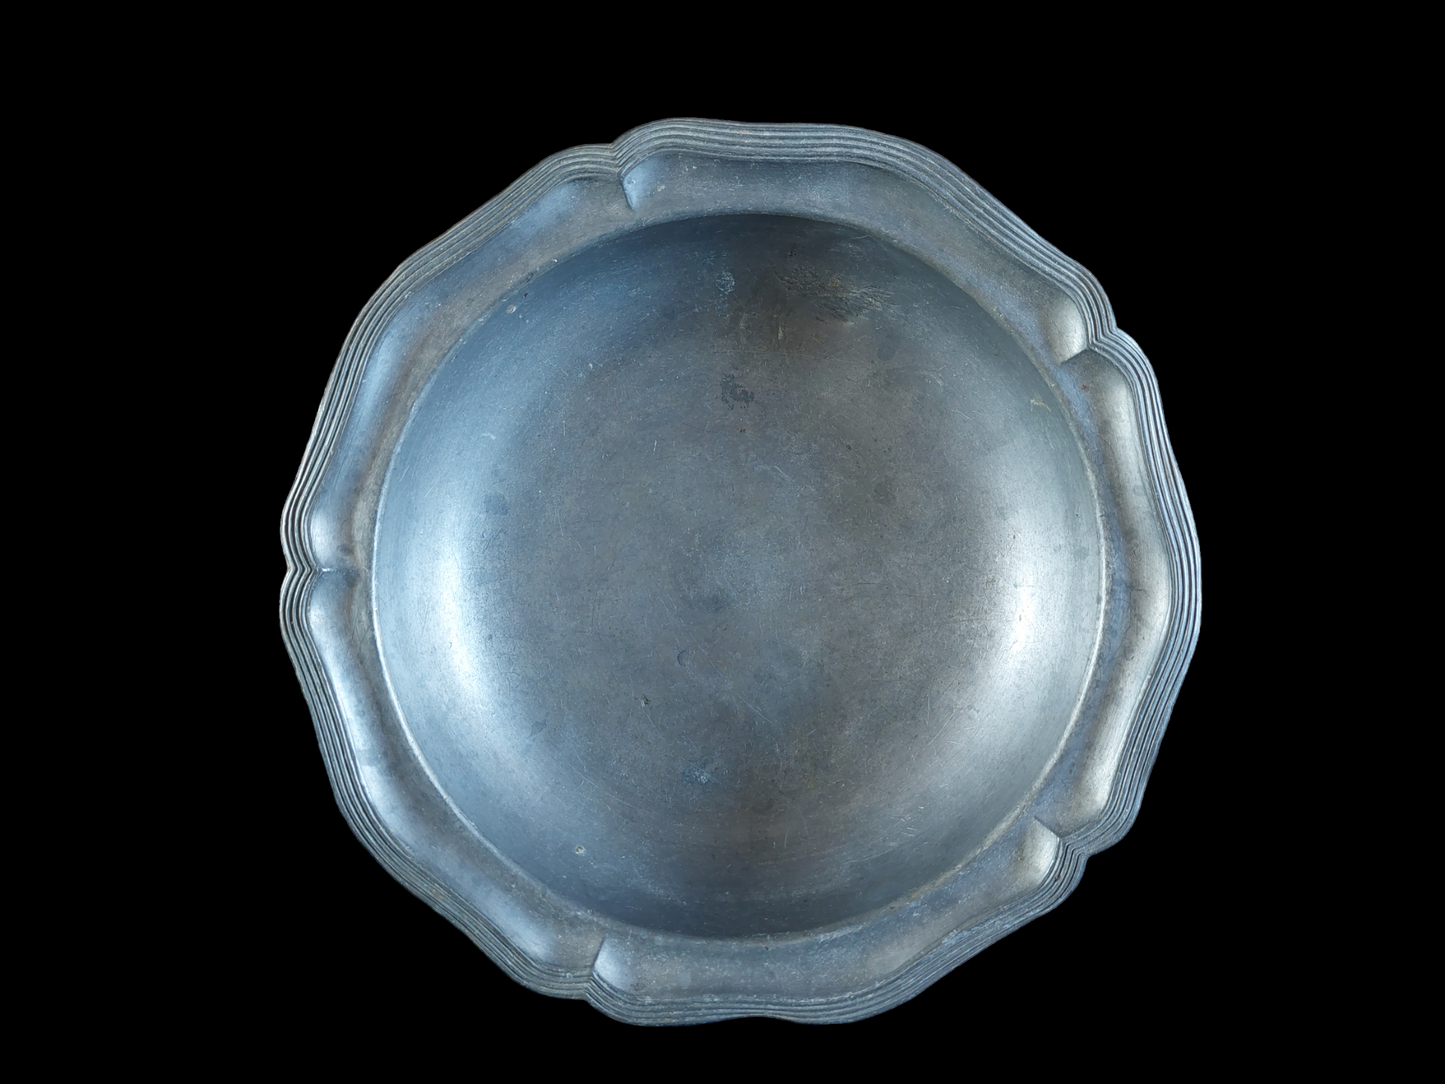 Pewter bowl for burning incense or herbs